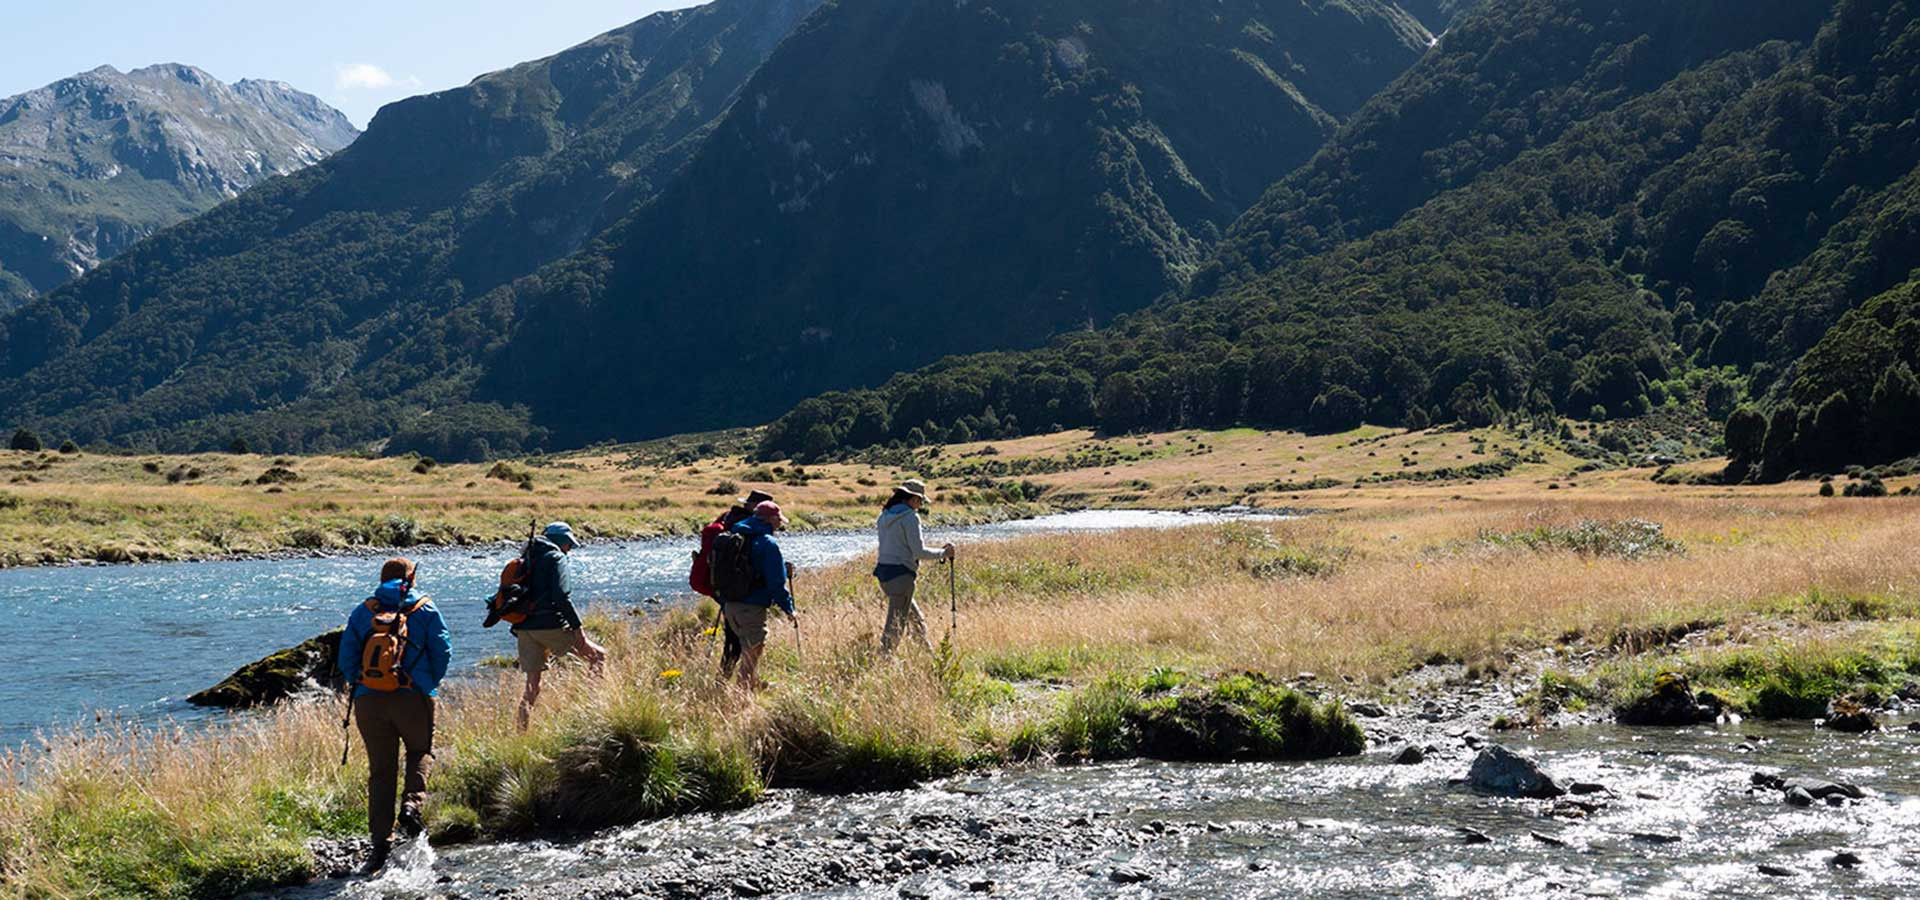 Fly, Walk, and Jet boat through New Zealand’s most spectacular alpine environment on an adventure like no other.